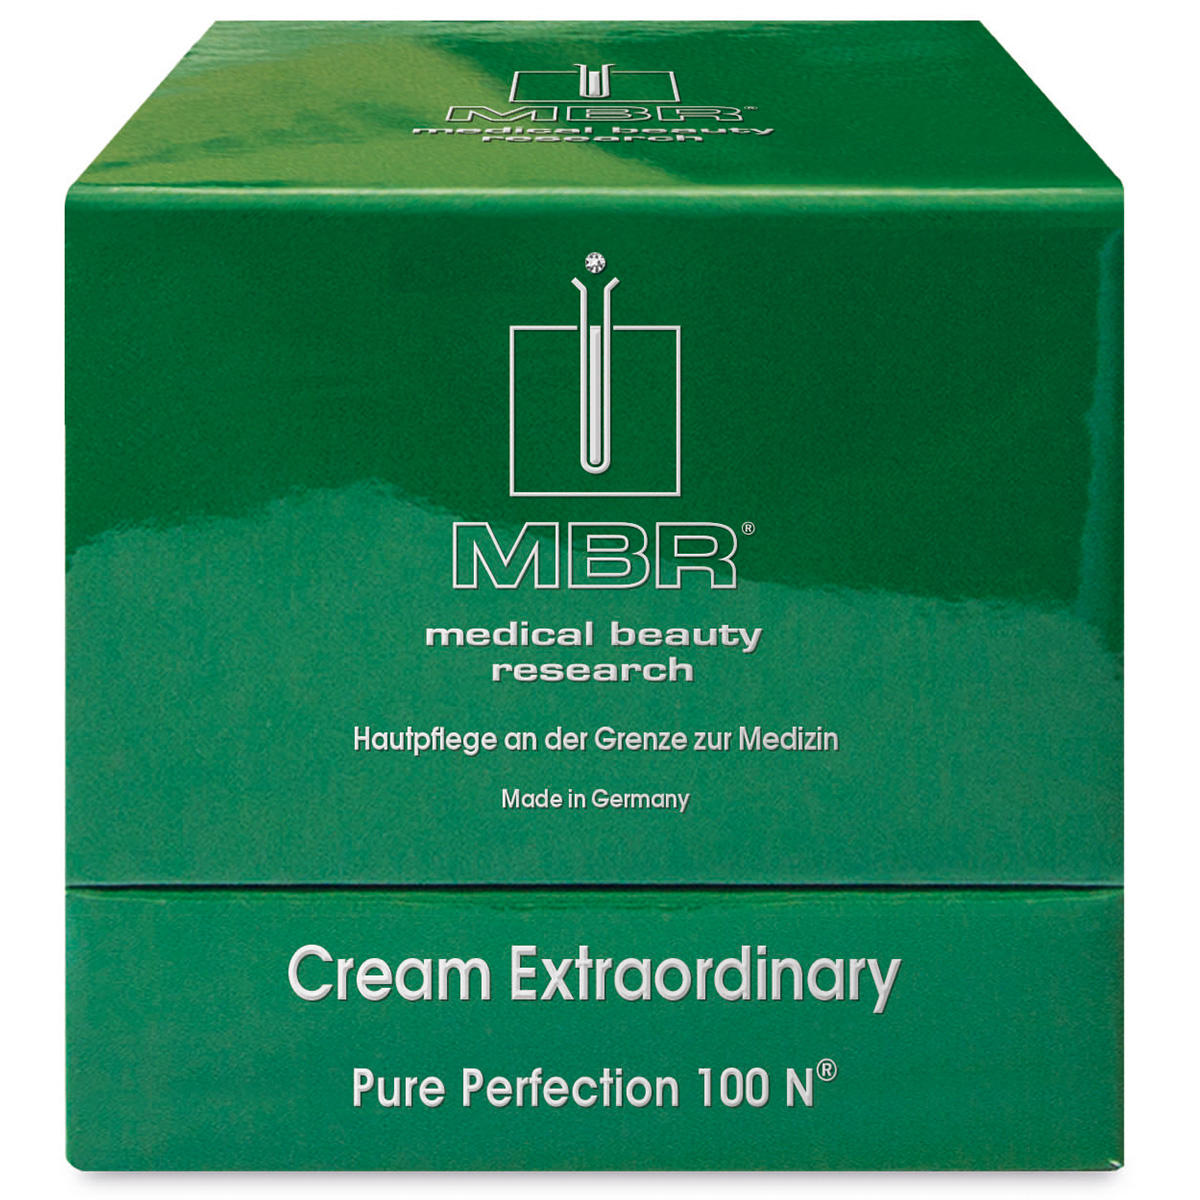 MBR Medical Beauty Research Pure Perfection 100 N Cream Extraordinary 50 ml - 2